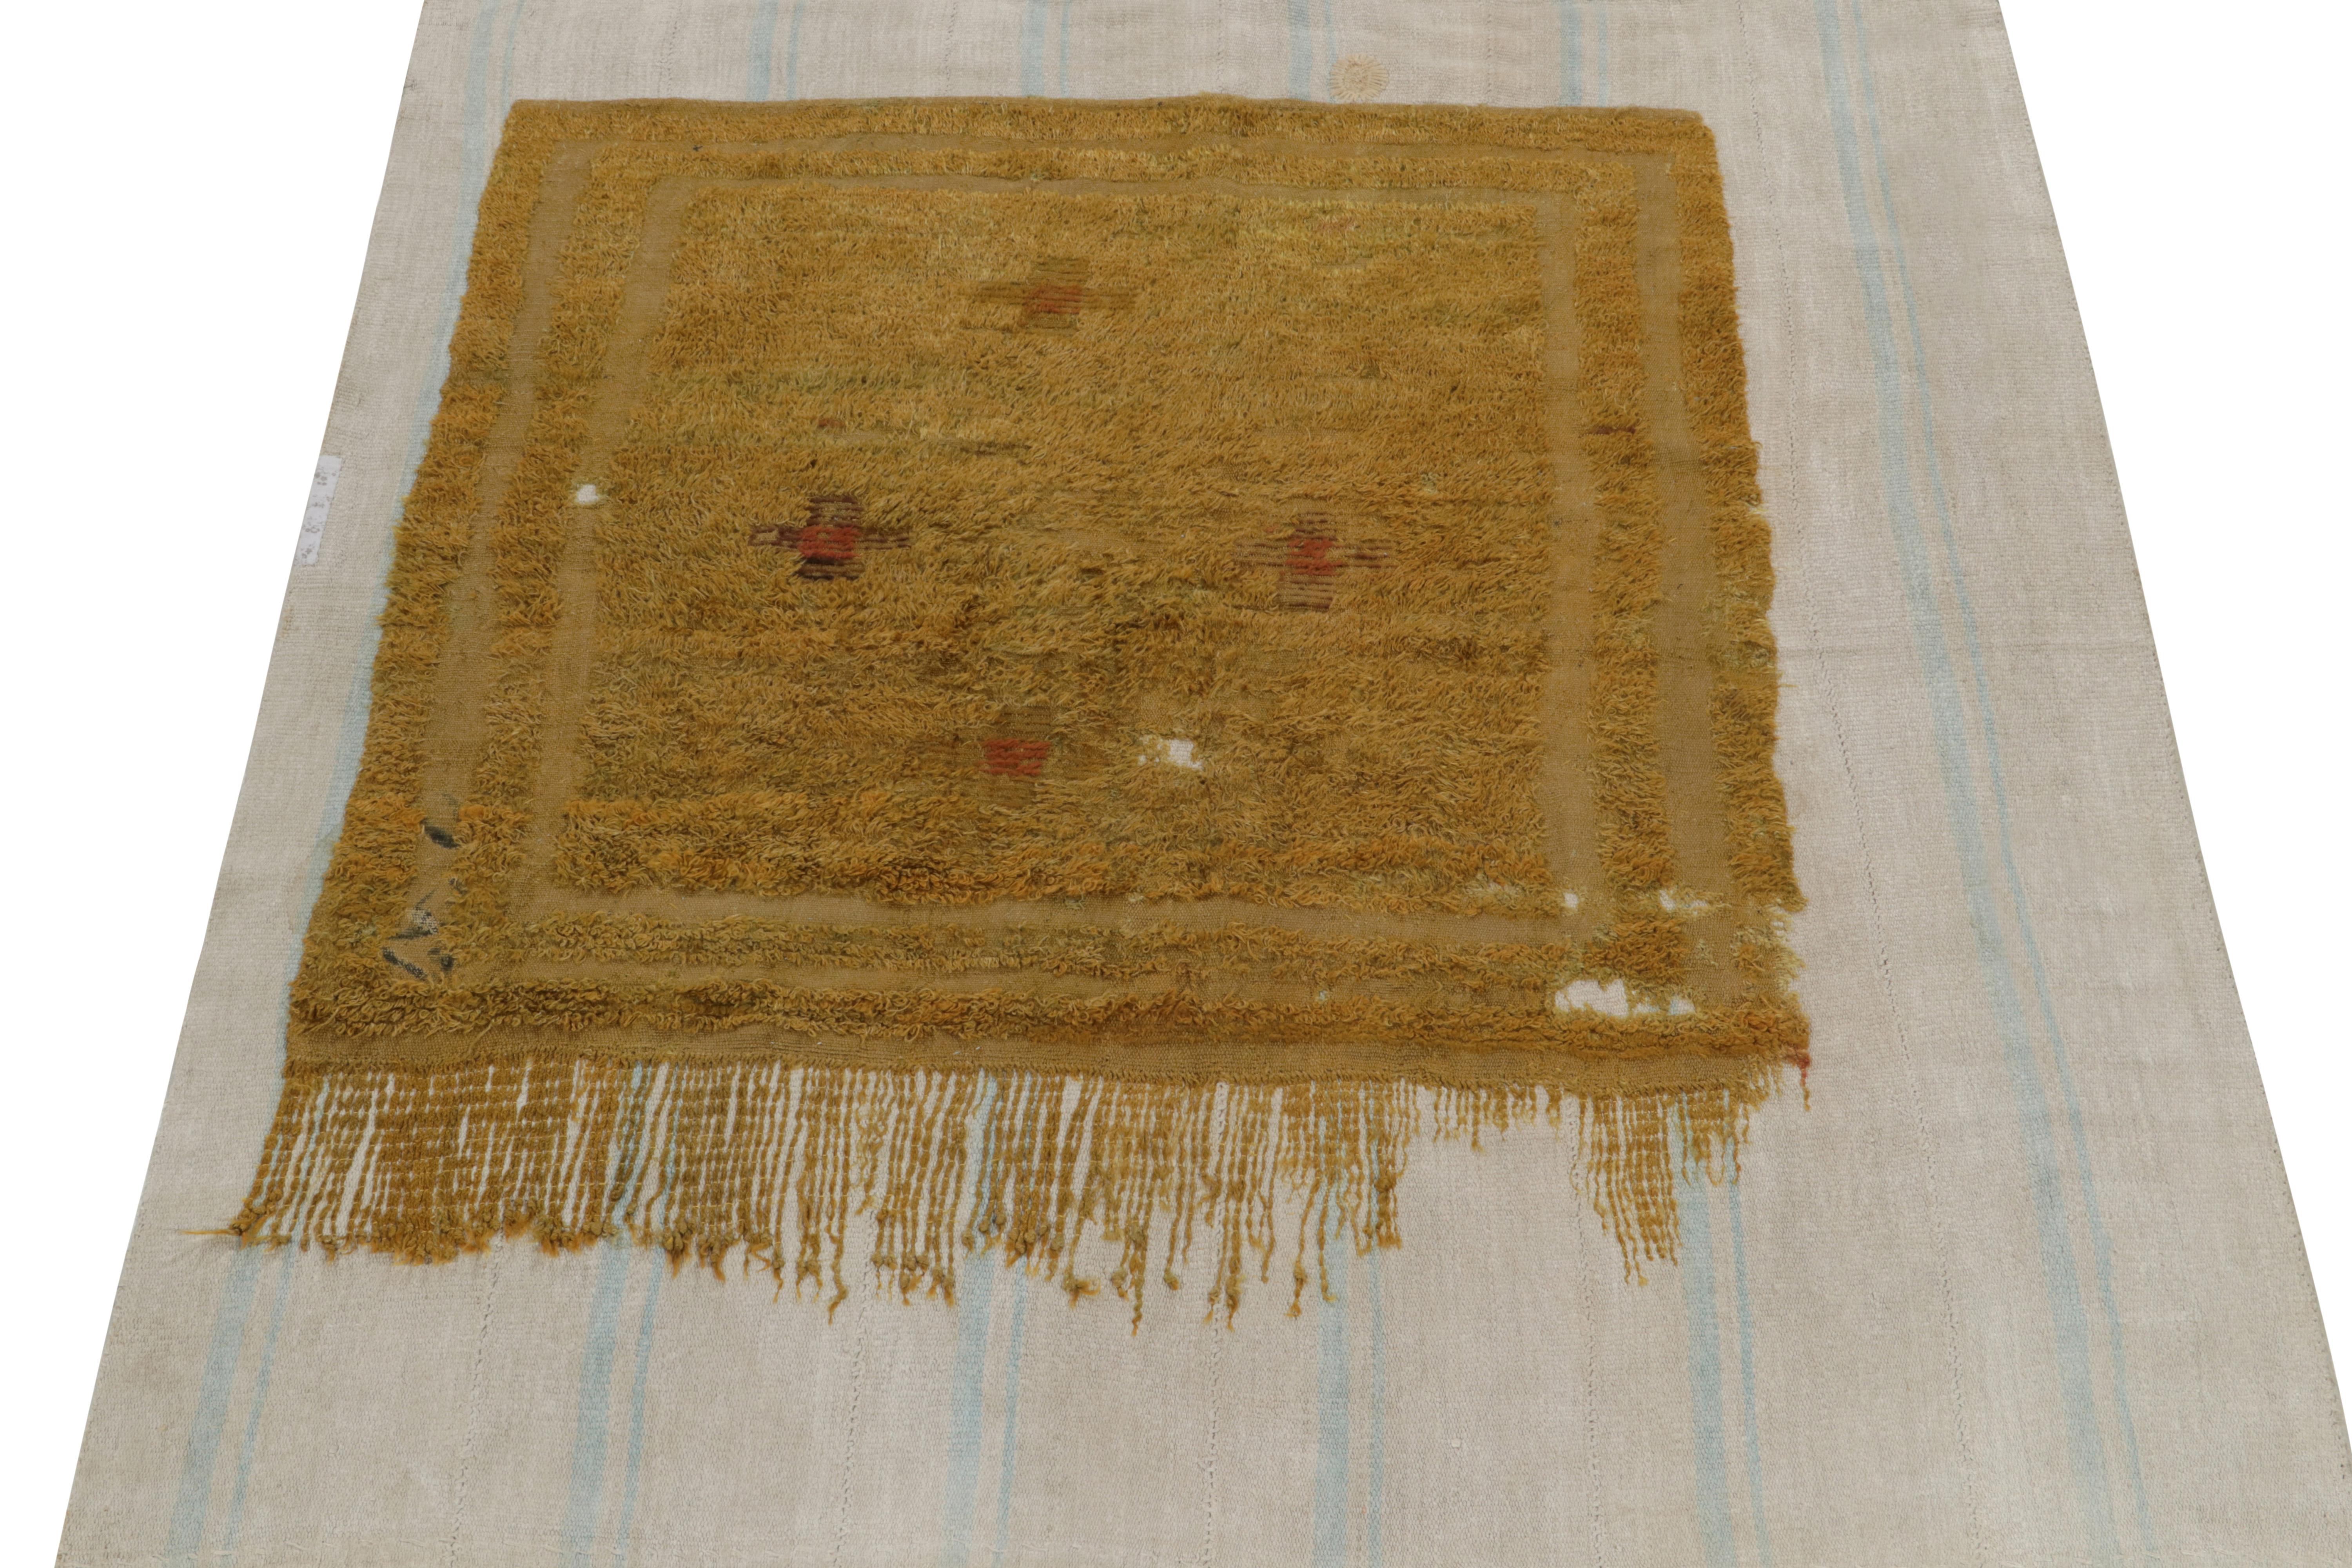 Hand-knotted in fine wool, a 5x6 fragment rug bearing distressed aesthetics resting calmly on a blue & gray flatweave. The fragment prevails in luscious gold-brown tones complementing a natural high low atop the flatweave—capable of adorning a